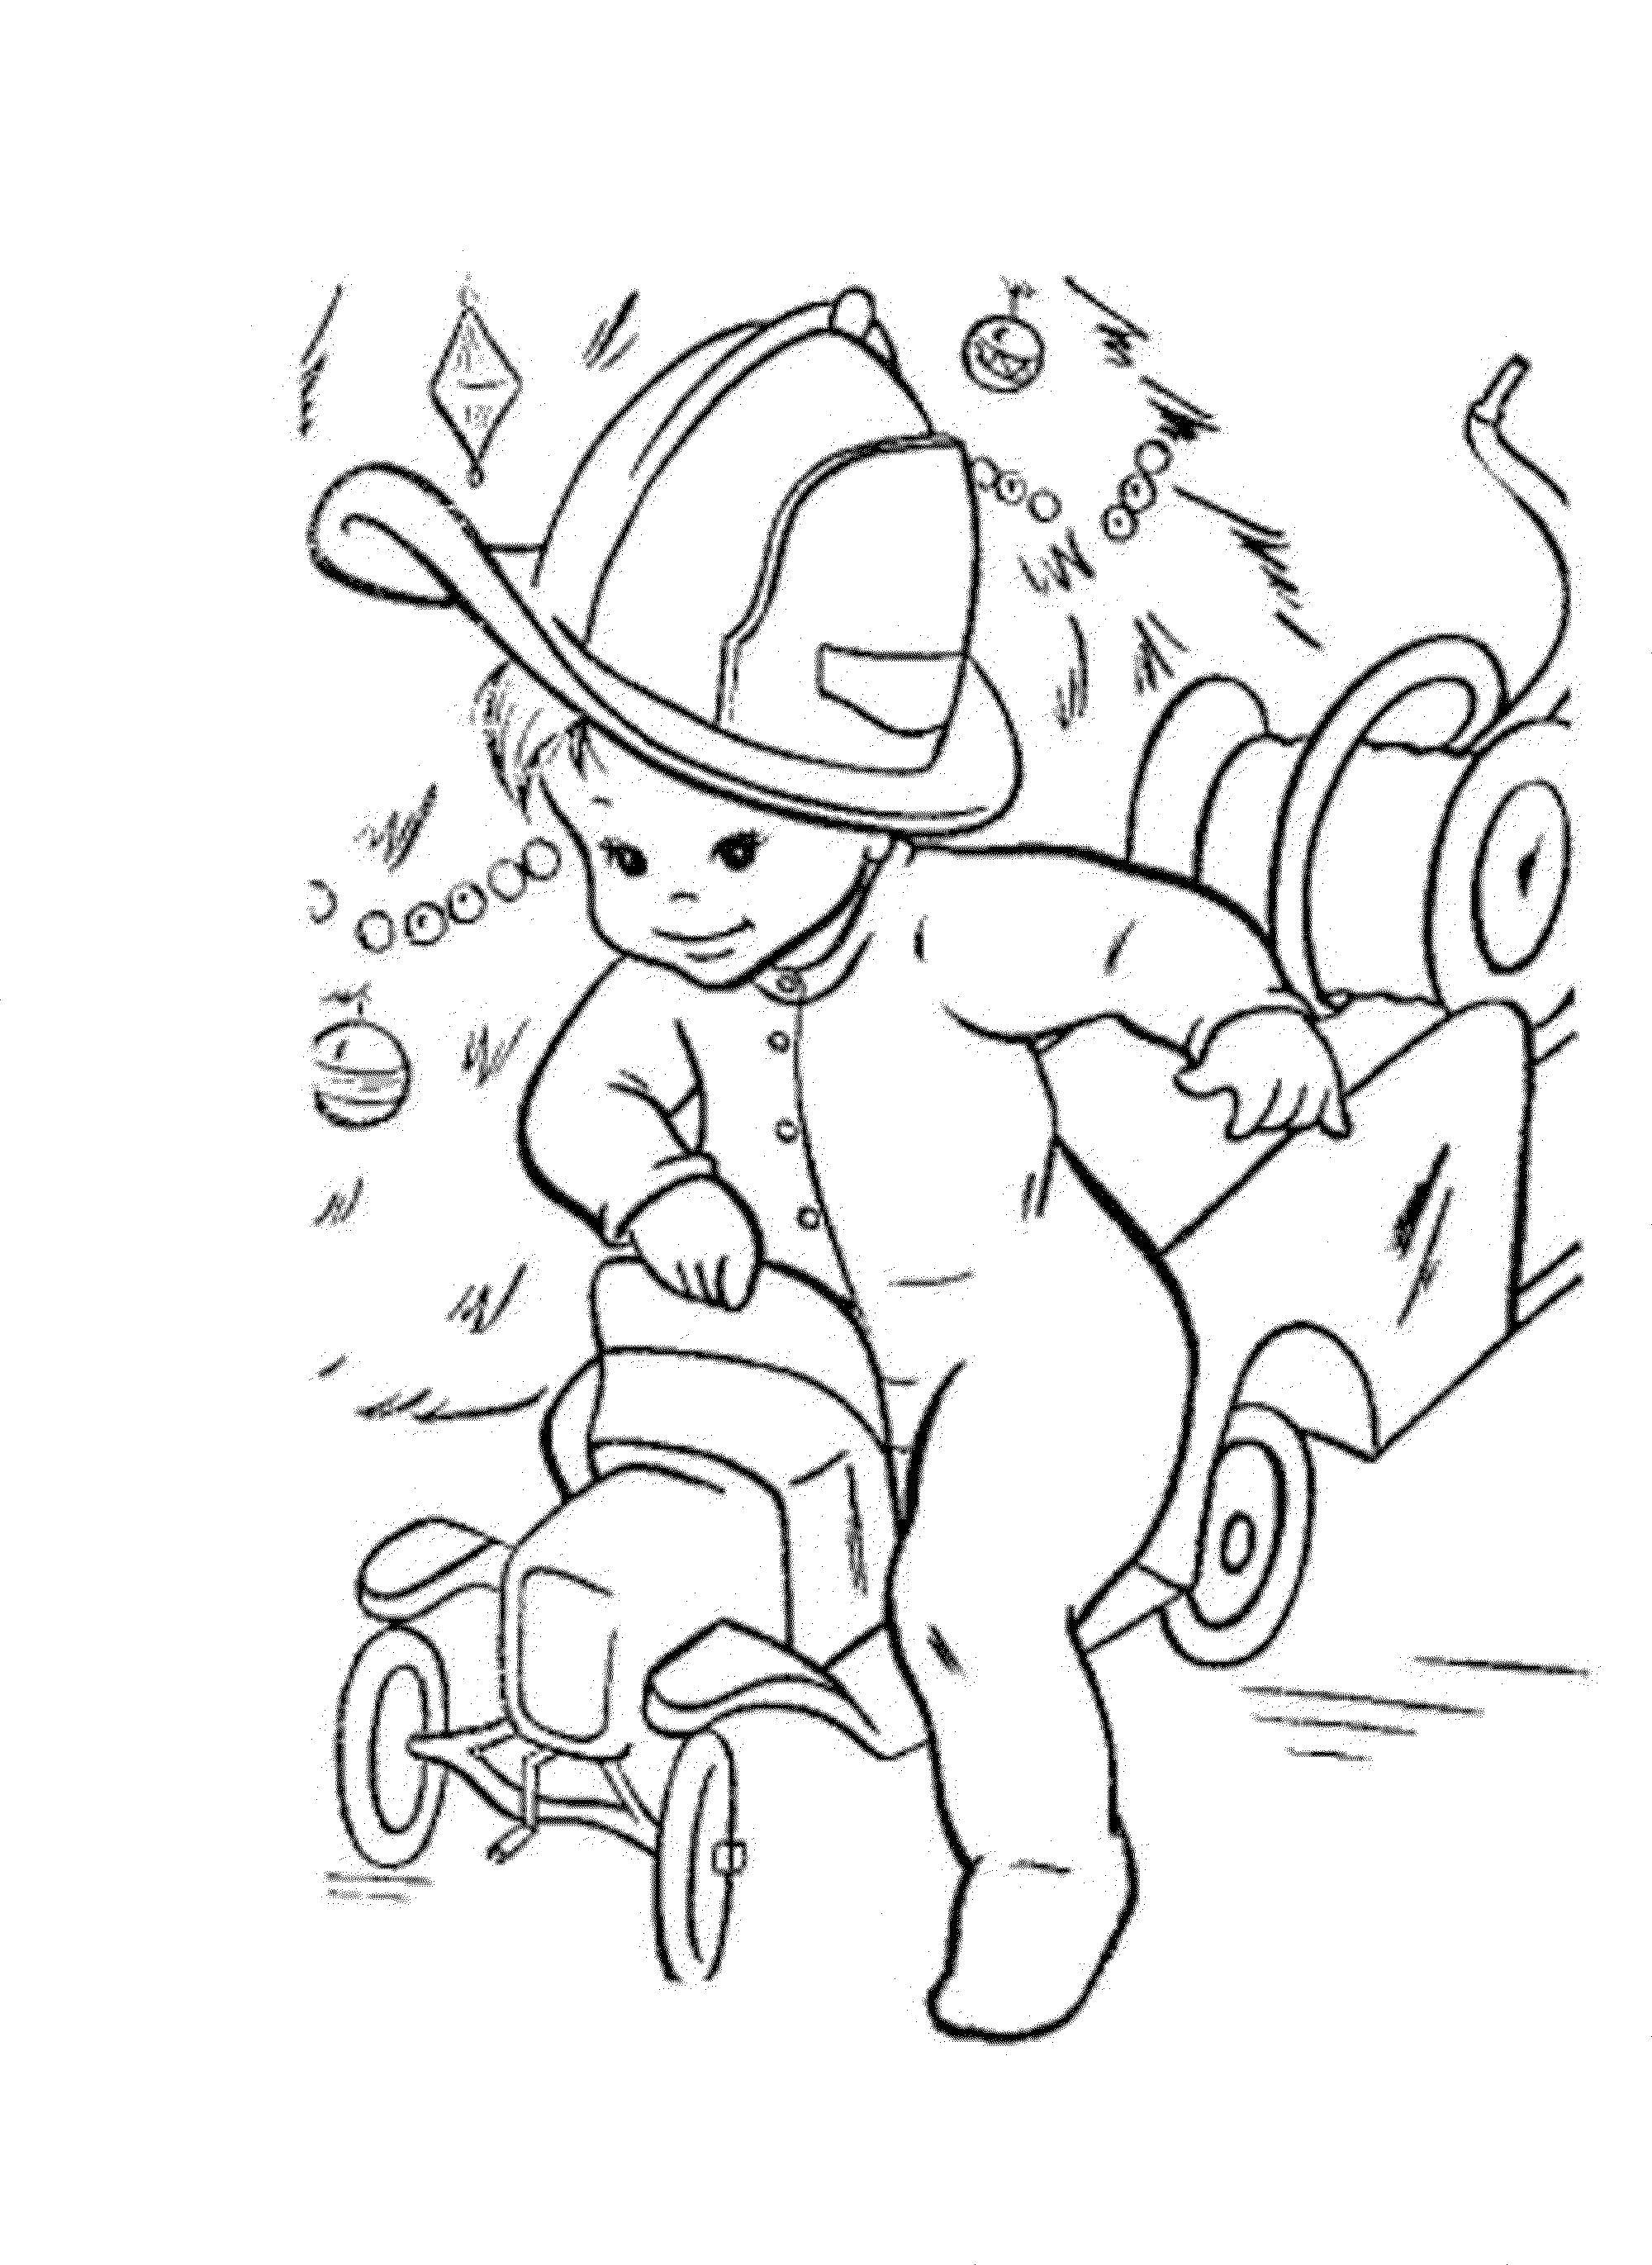 Coloring A child riding on a fire truck. Category People. Tags:  the child, car.